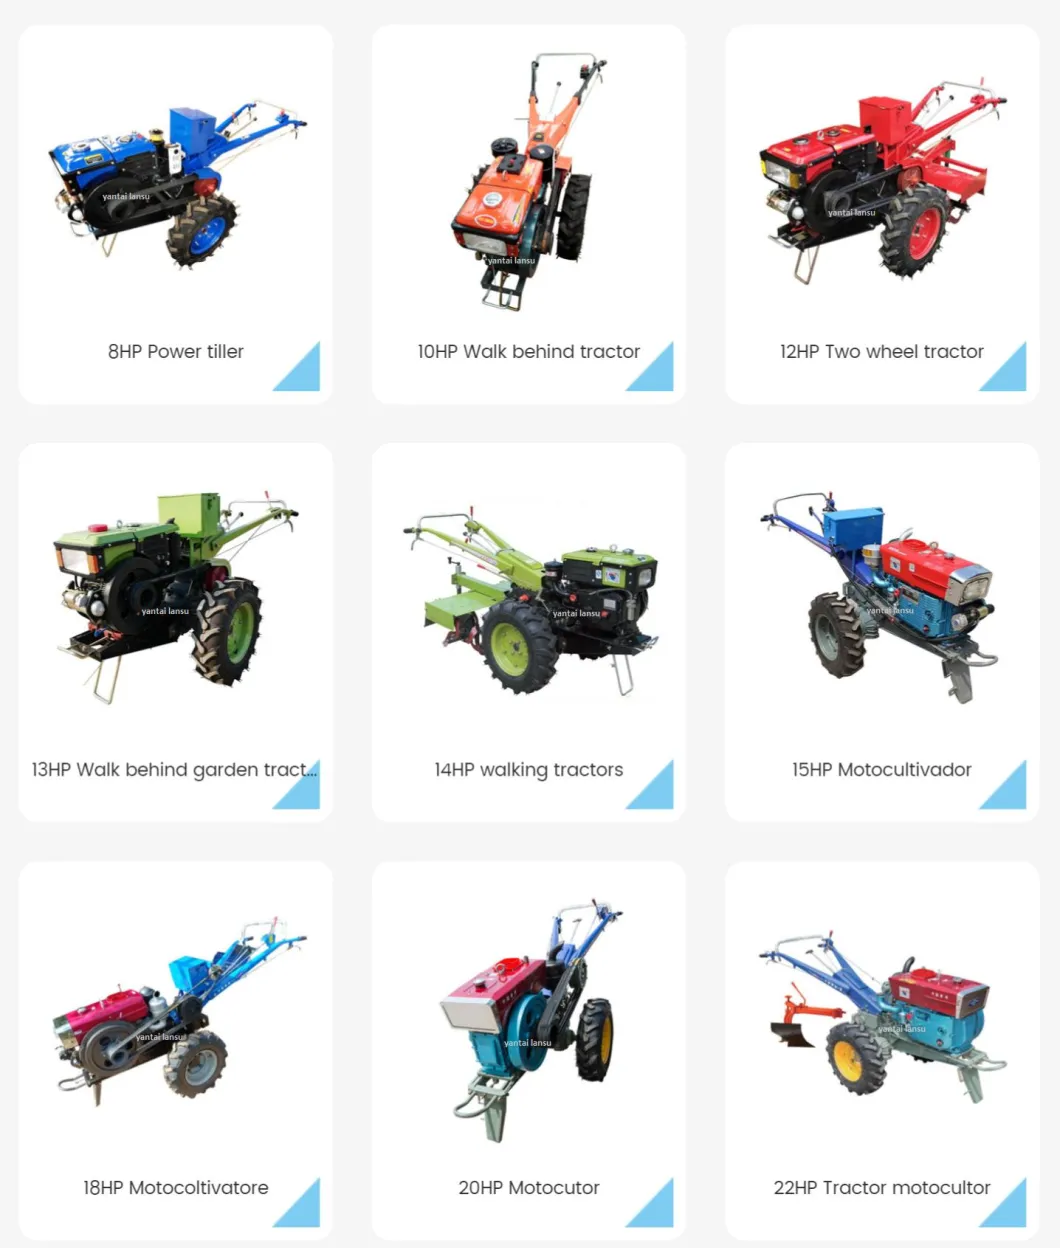 Df Model Water-Cooled / Condensing Cooled Diesel Engine Walking Tractor, Low Price Power Tiller for Sale